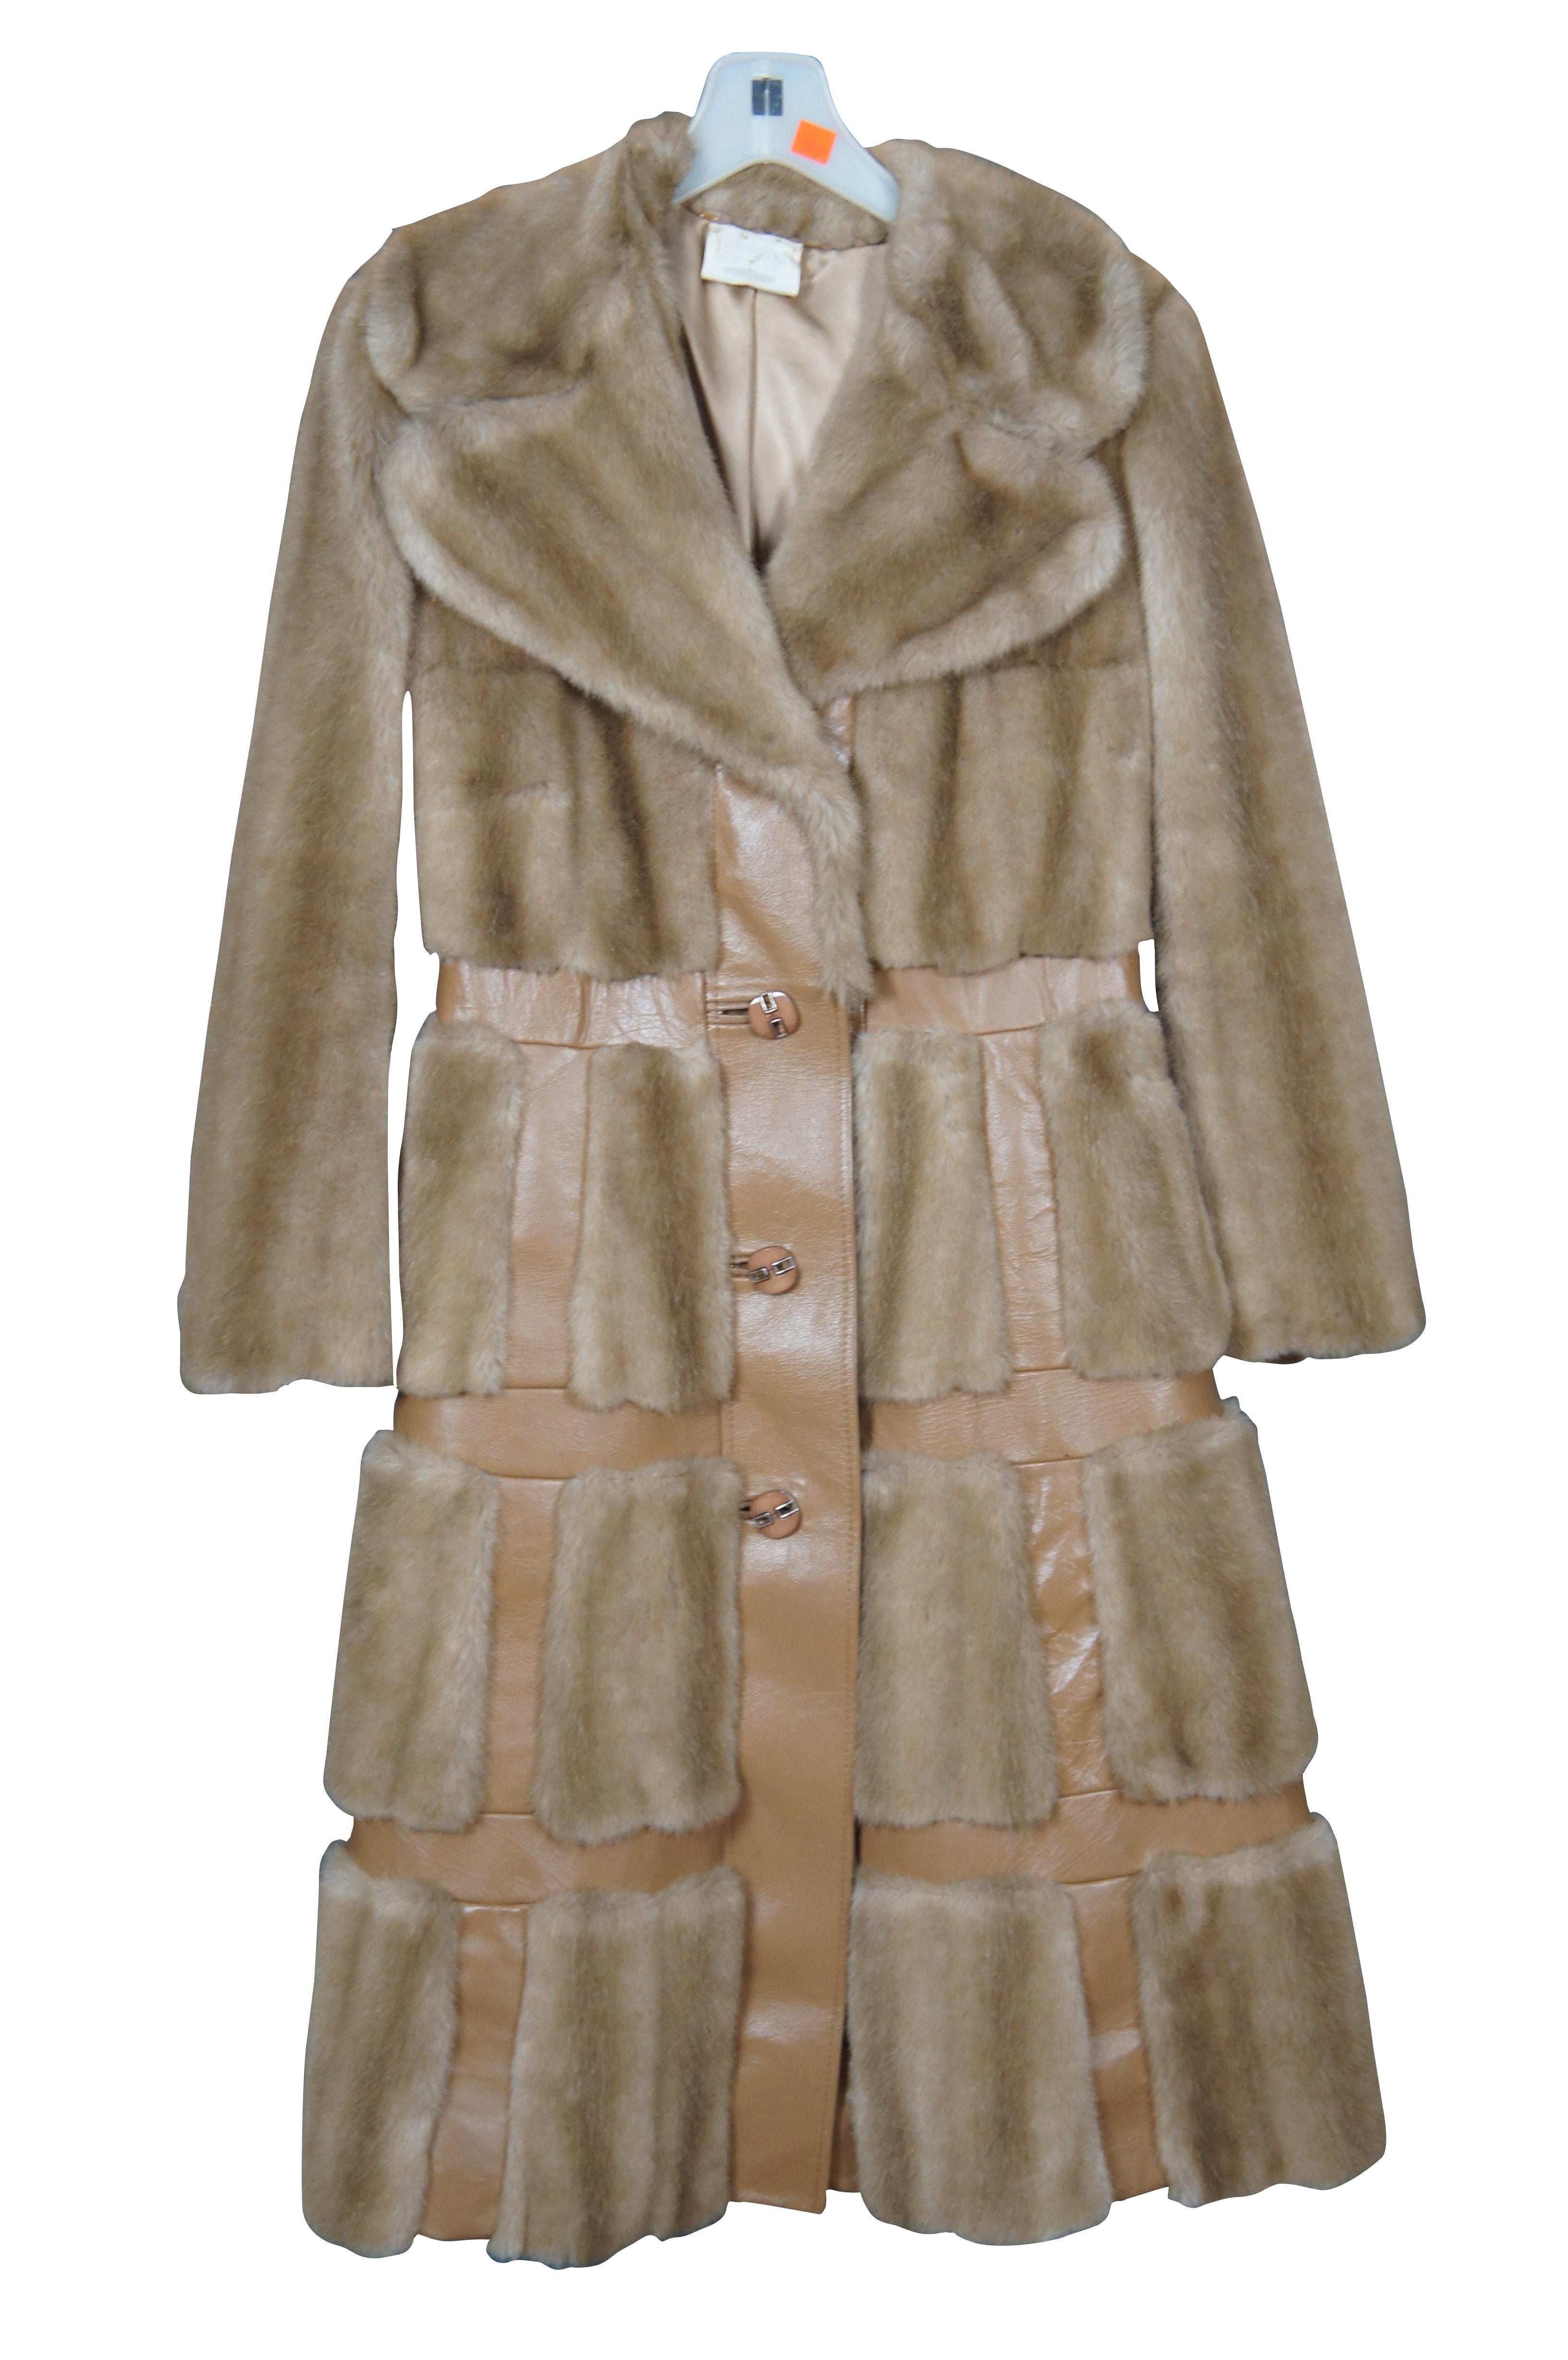 Vintage 1960s Tissavel of France women’s, three quarter length coat featuring simulation fur with a skirt intersected with a grid design and belt of faux leather, two side pockets, beige silk lining, and one interior pocket. Made in